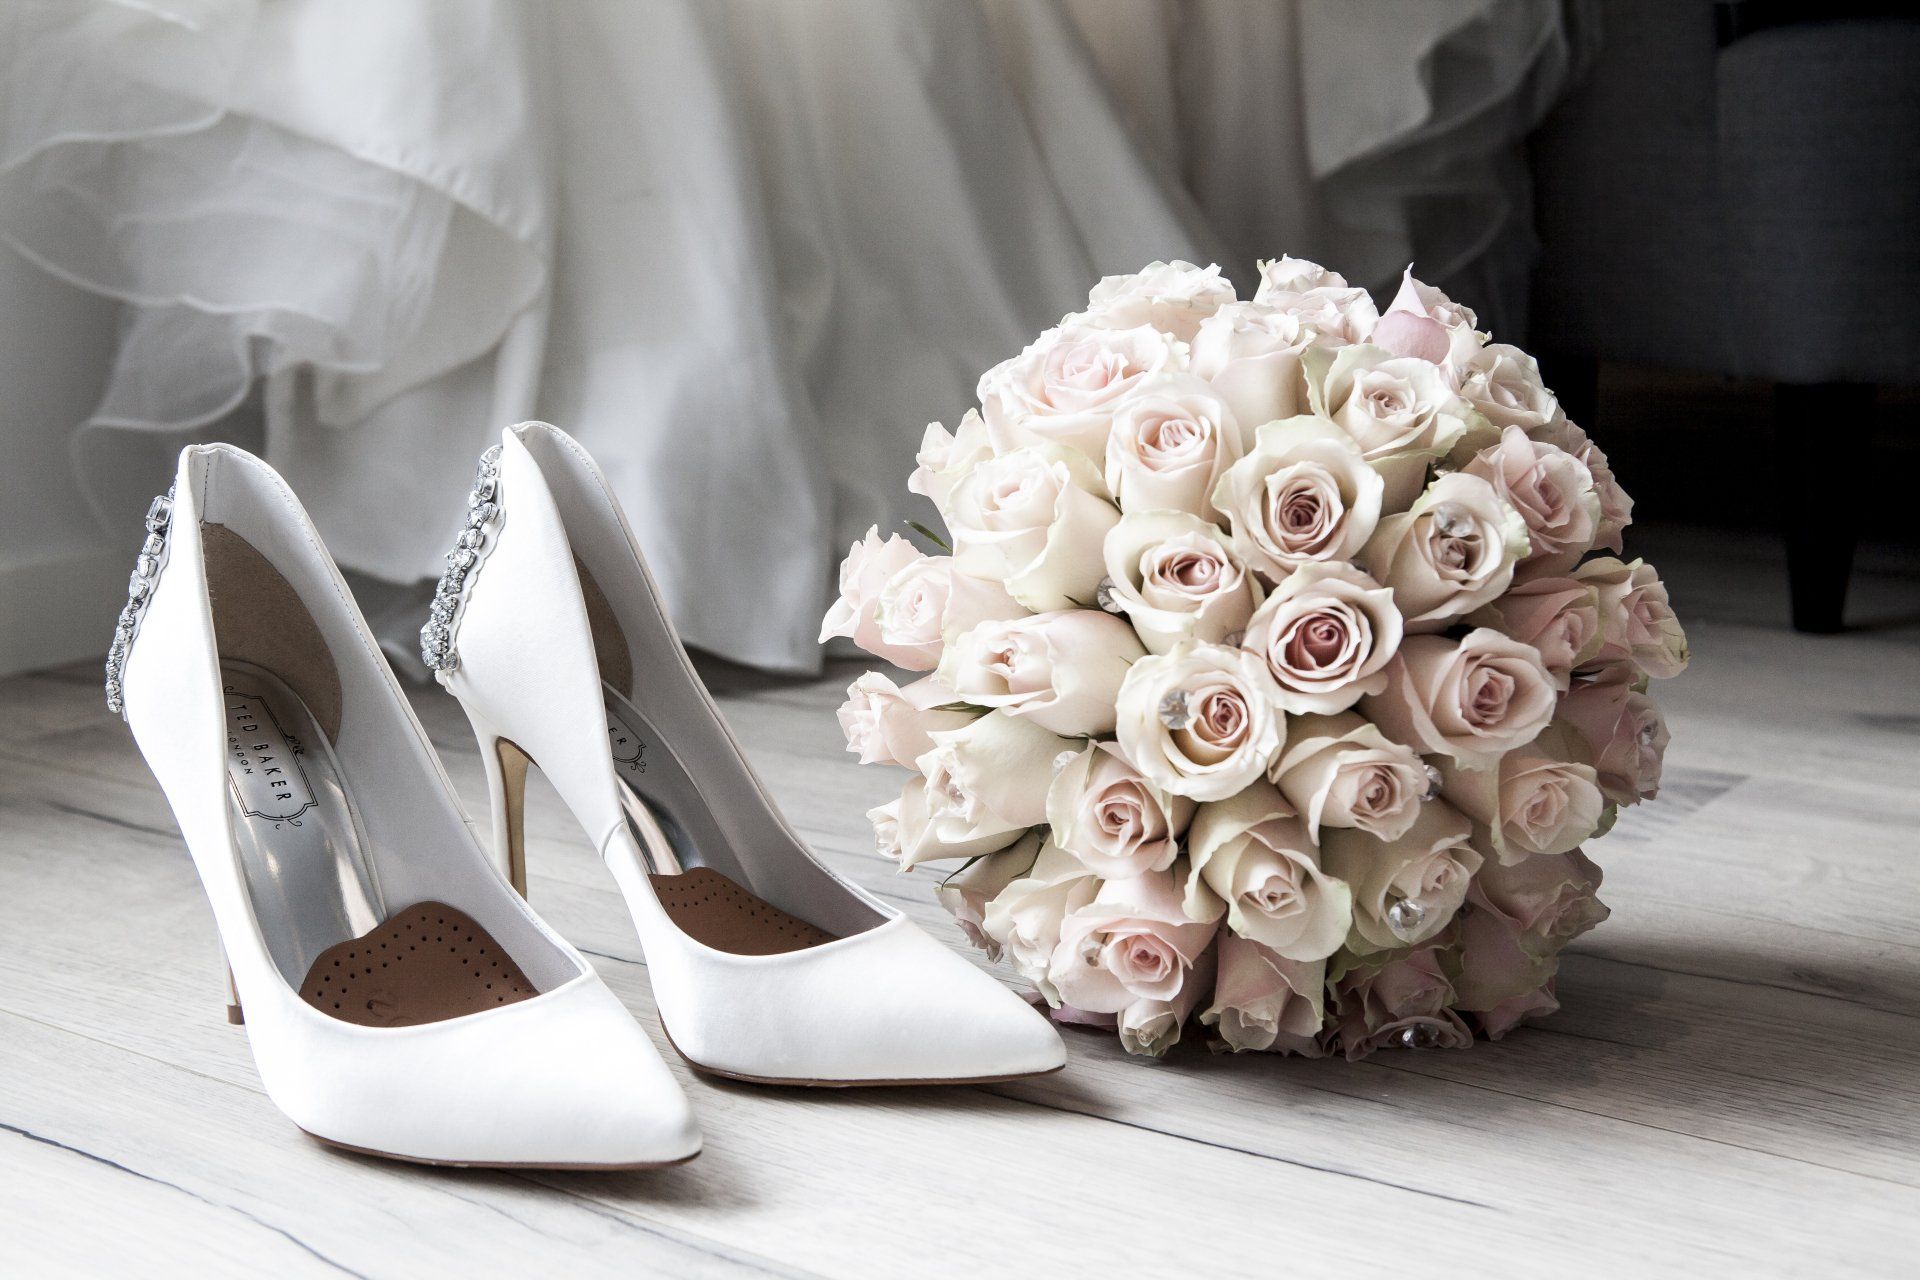 Bride's flower bouquet and bridal shoes at Waco wedding photo booth rental